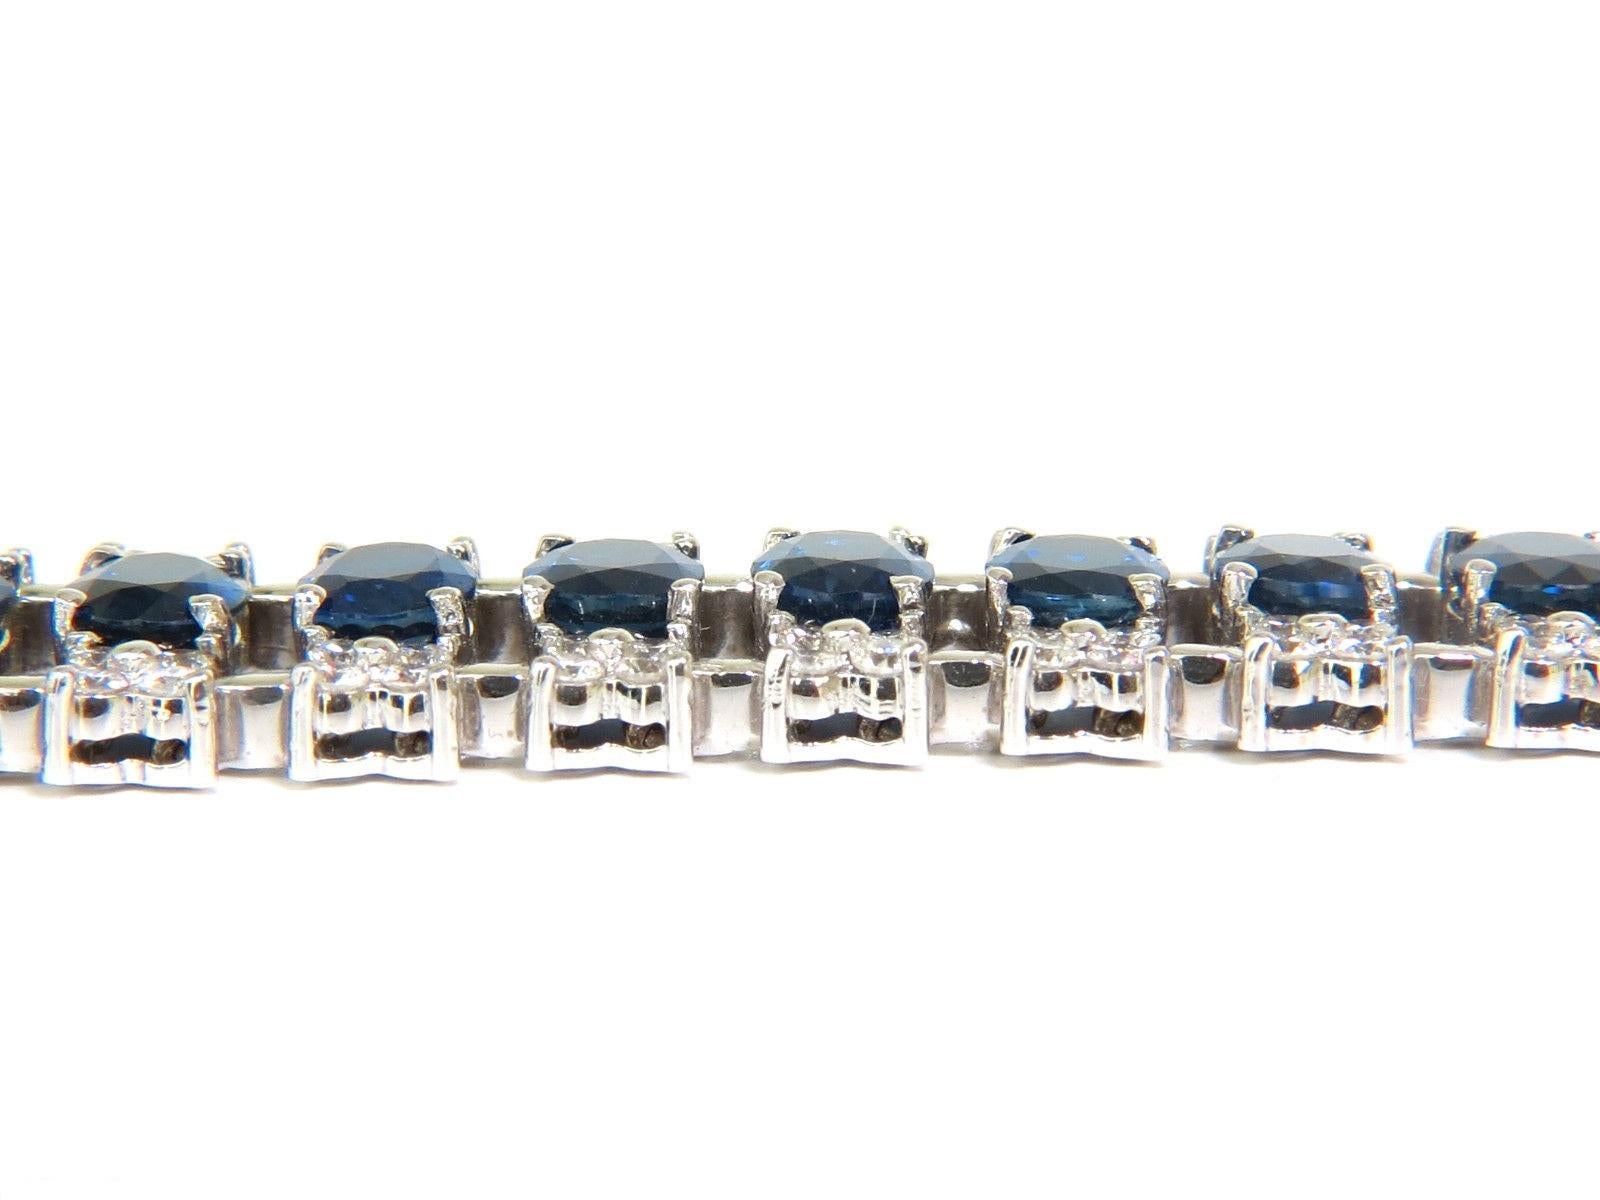 33.75 Carat Natural Gem Sapphire Diamond Bracelet Three-Row and Wide Cuff For Sale 2